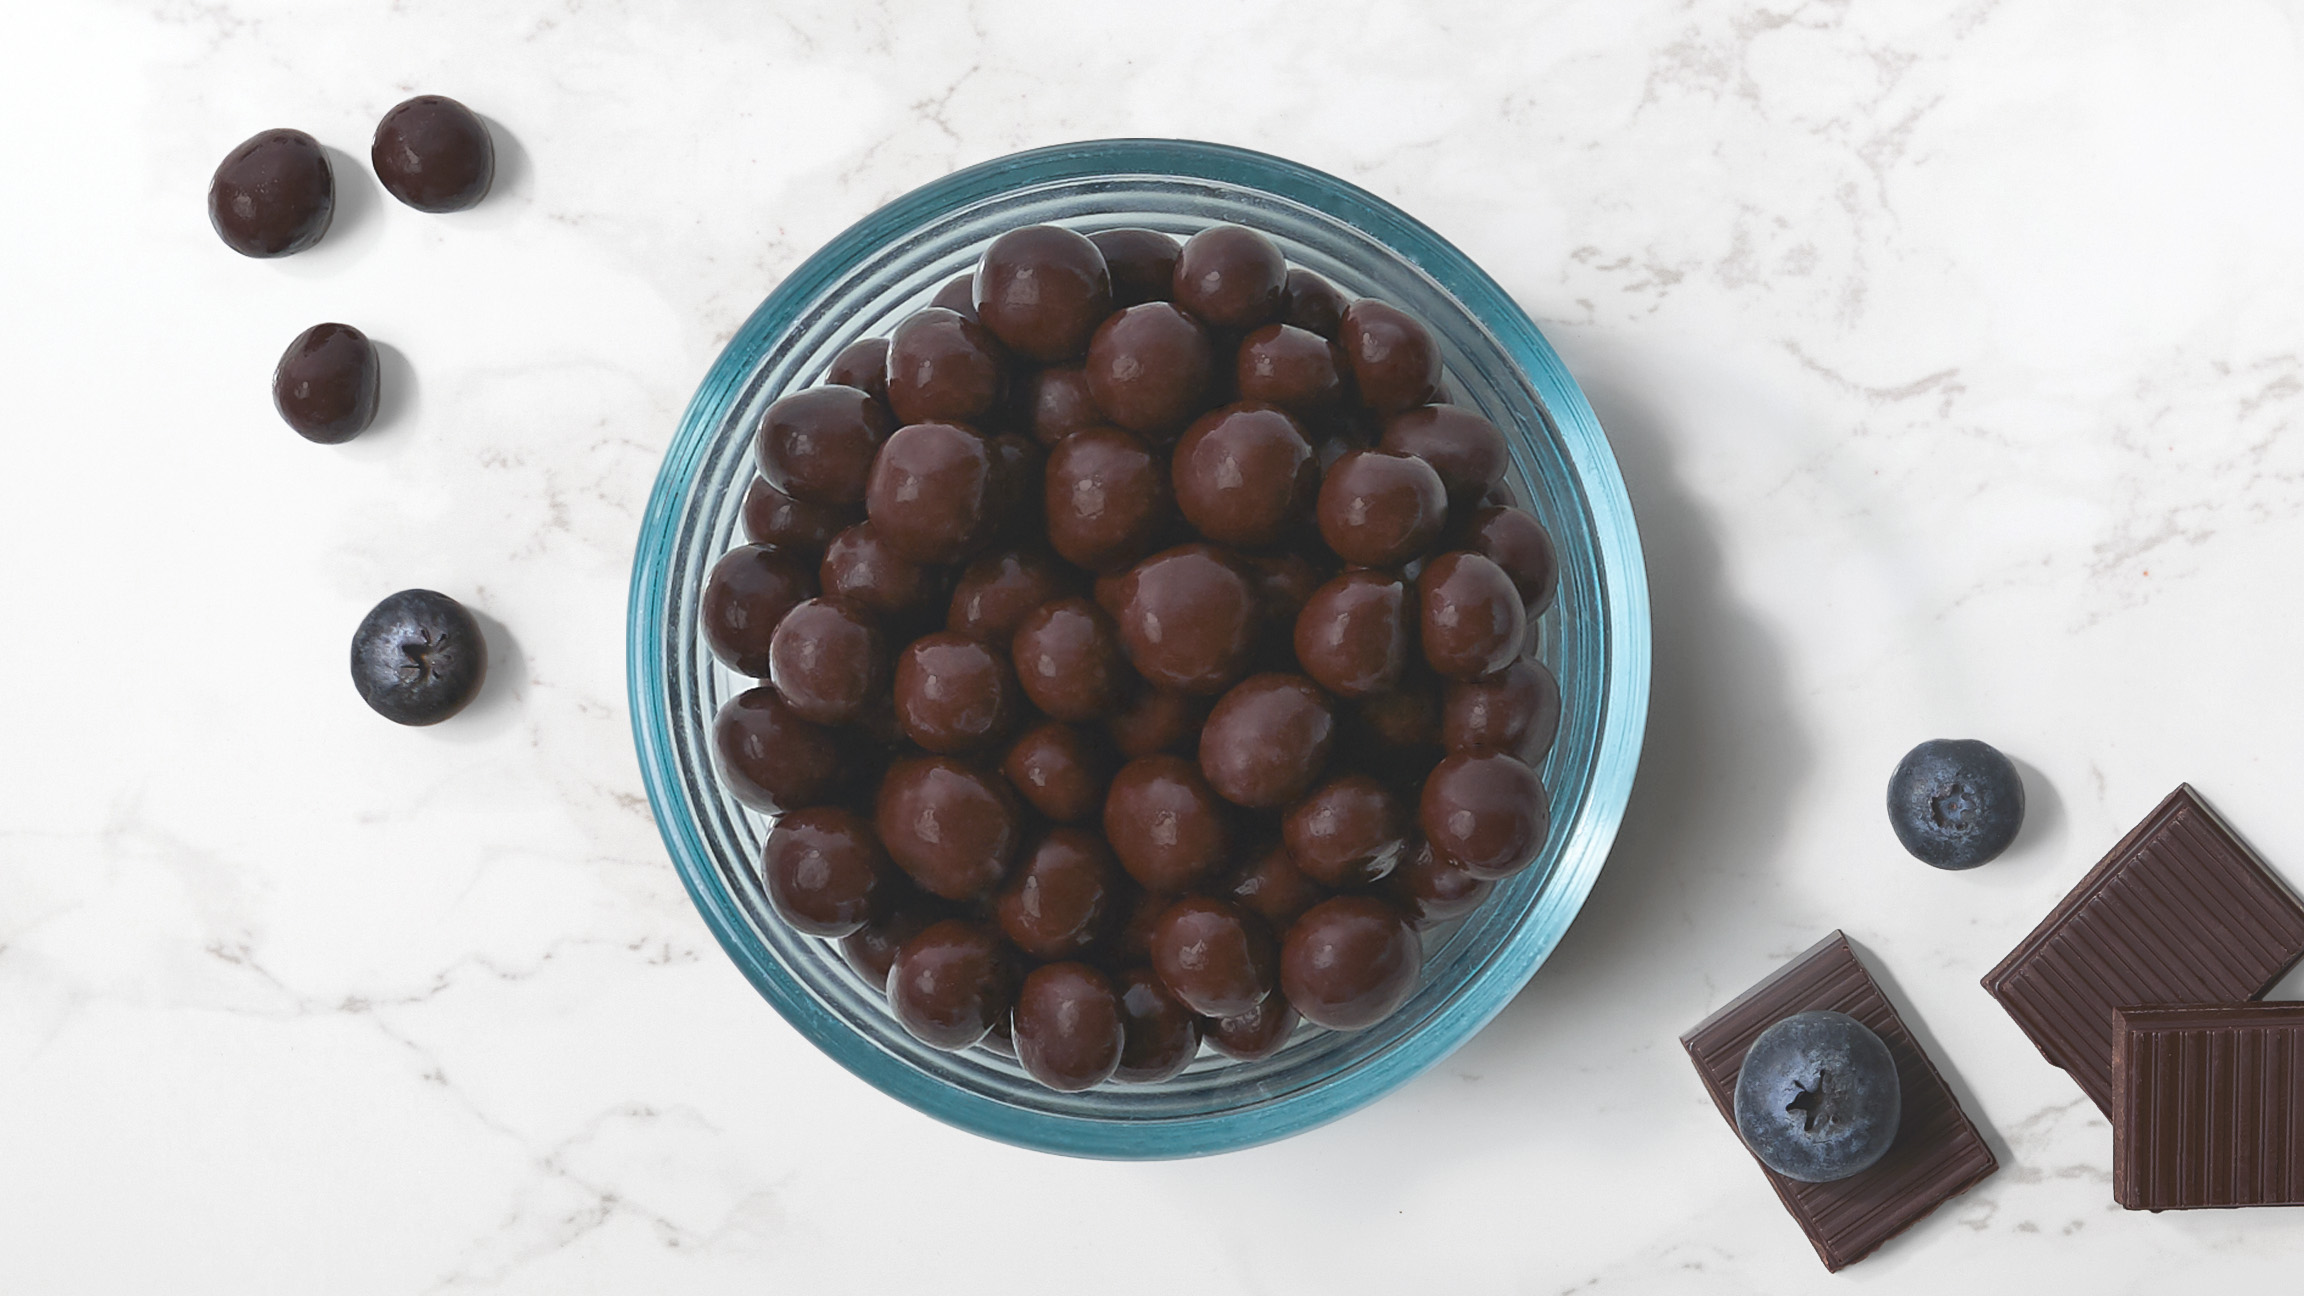 Dark chocolate blueberries in a glass bowl with scattered fresh blueberries and pieces of chocolate